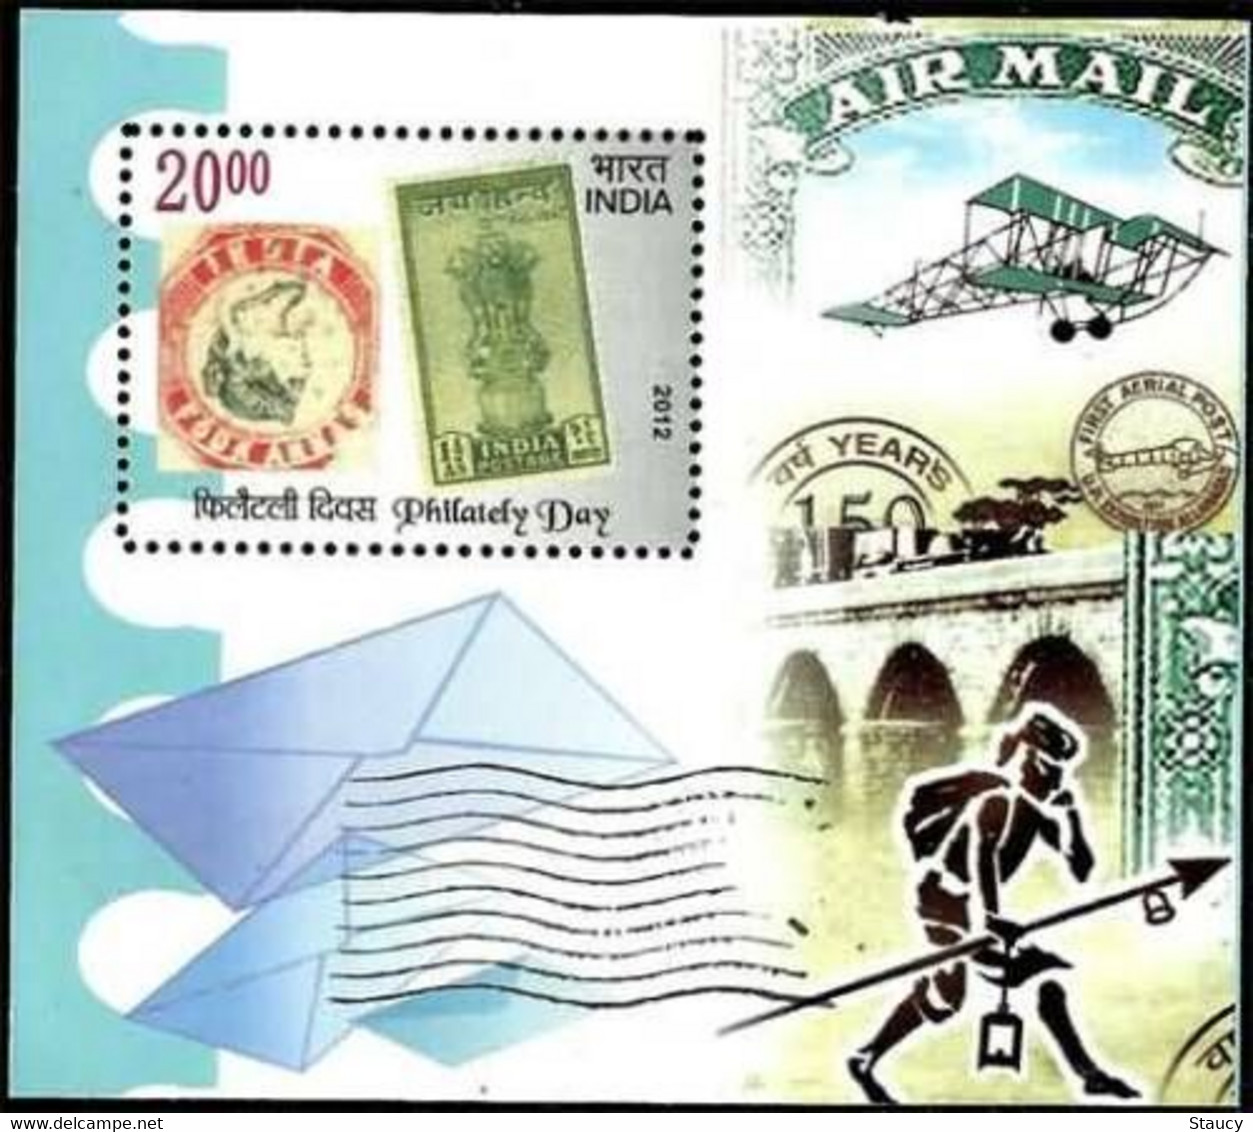 India 2012 Full Set Of Miniature Sheets 6v Lighthouse Olympics Aviation Dargah MS MNH As Per Scan - Moineaux